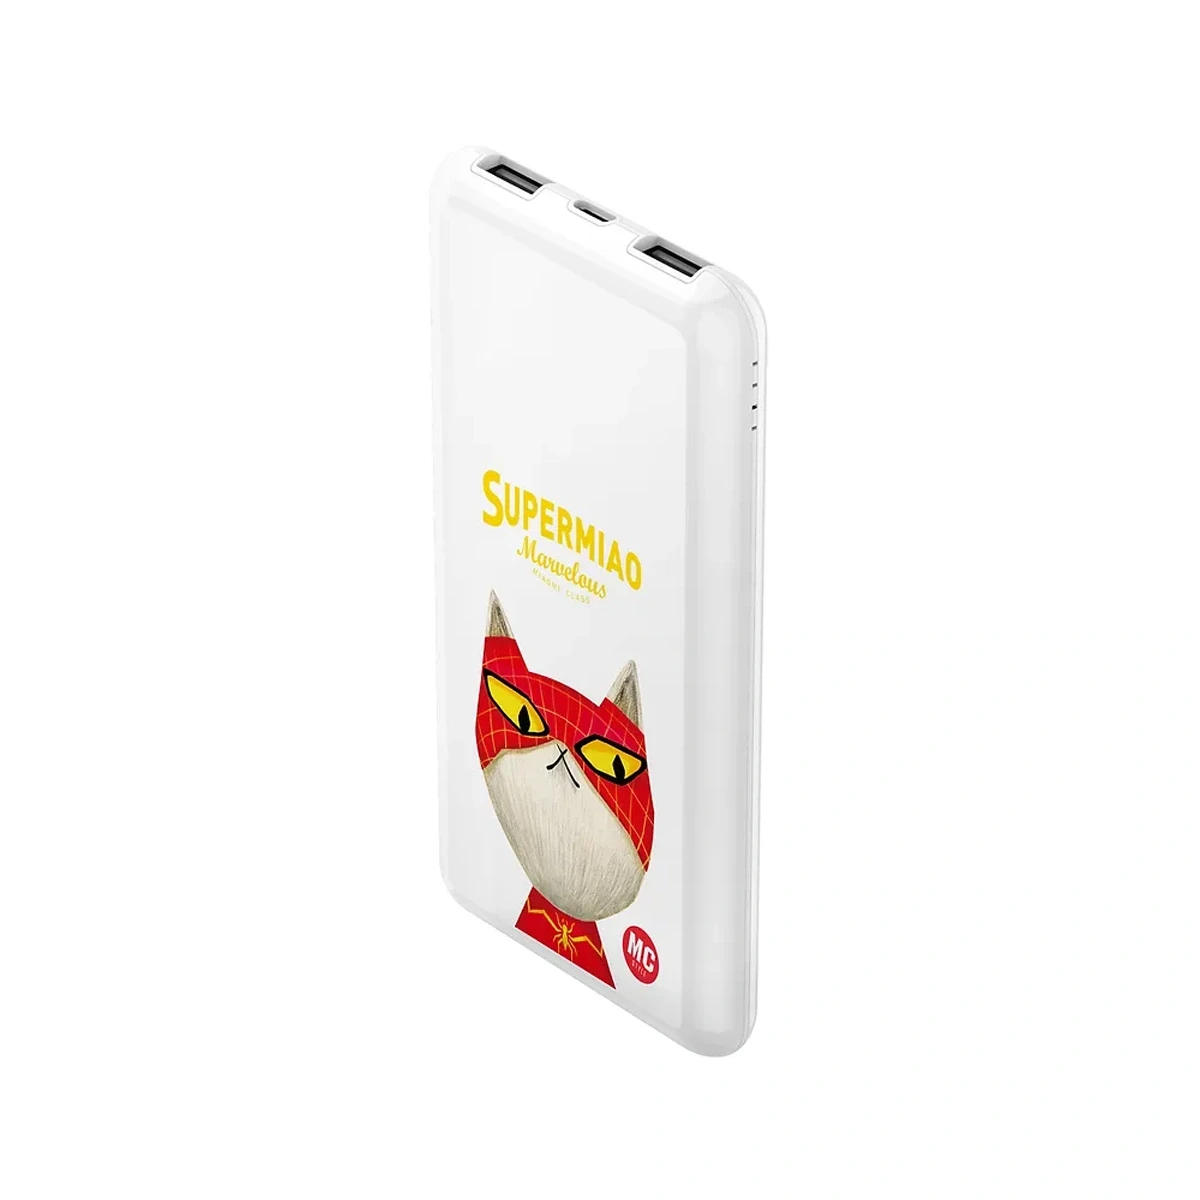 Zentality Power Bank 8000 mAh  supermiao RED